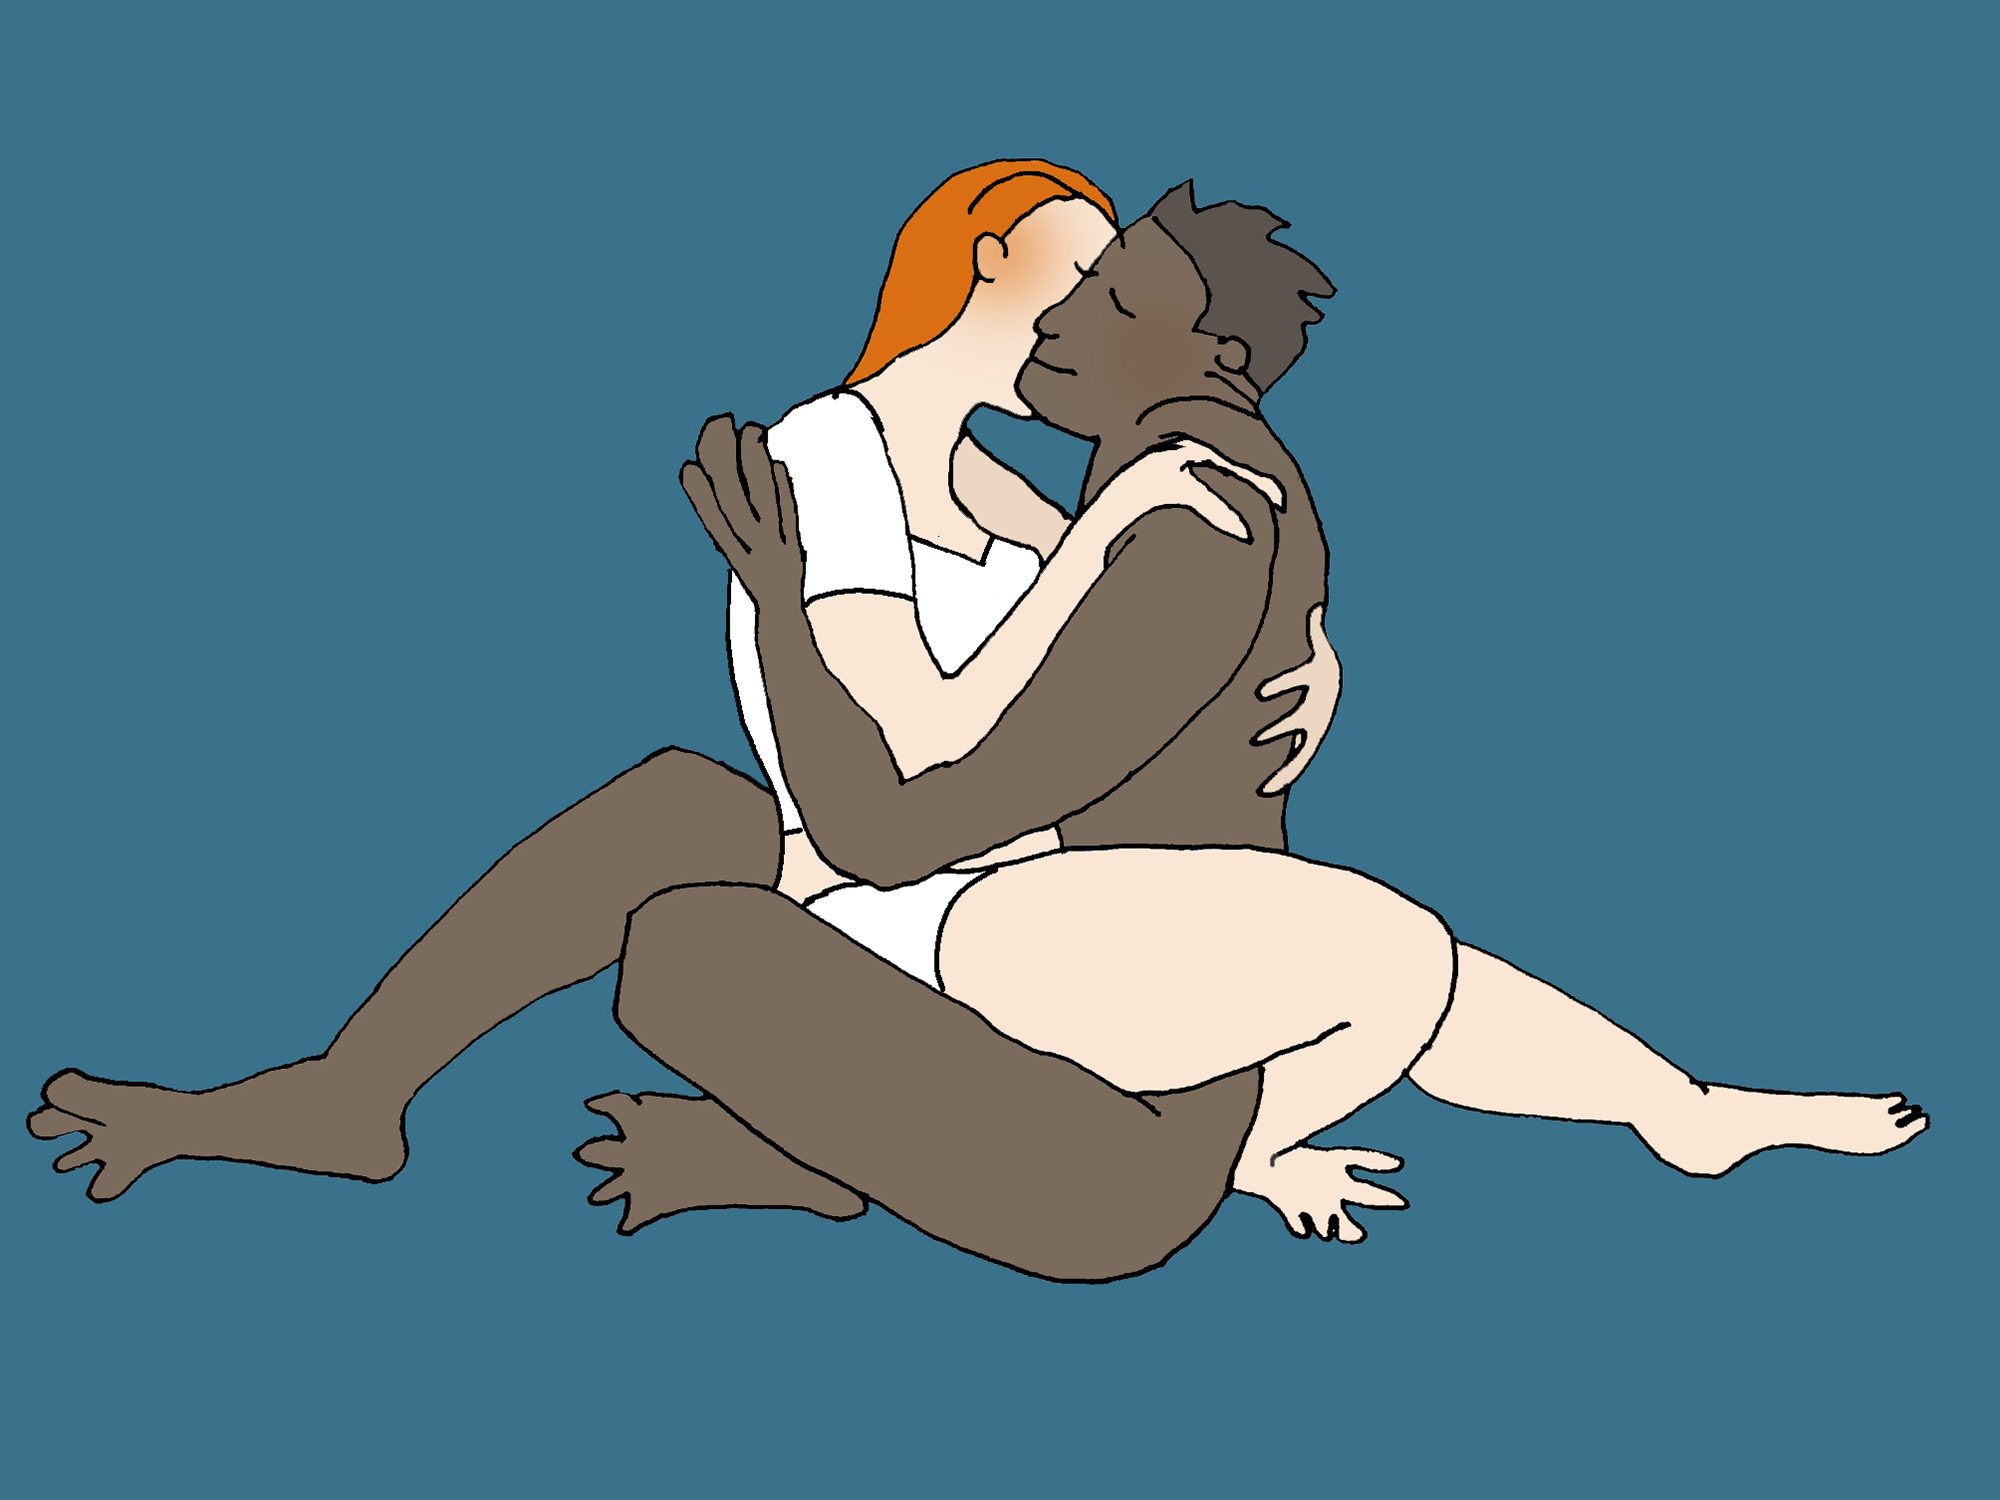 A woman in underwear sits on a naked man. She puts her leg and arms around him.